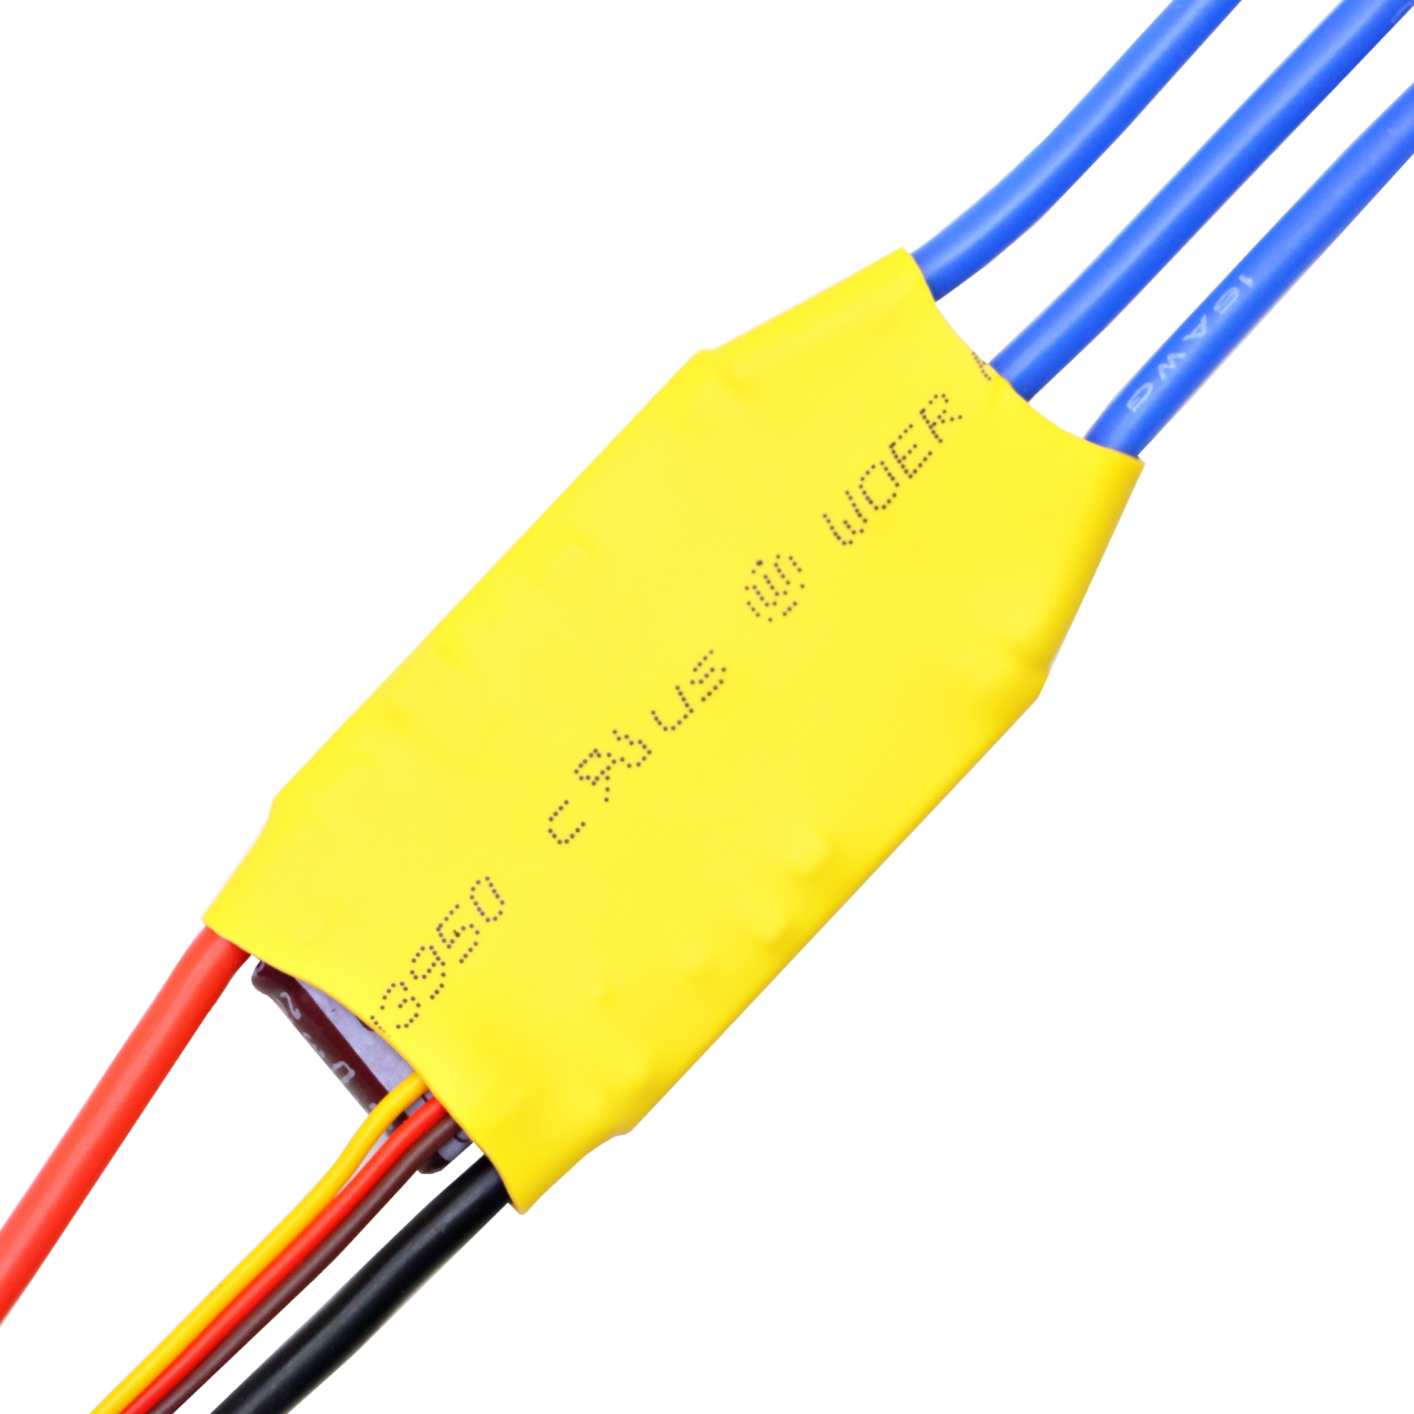 Simonk 30A 2-3s Brushless ESC With T Plug & Bullet Connector For Drone & RC Plane